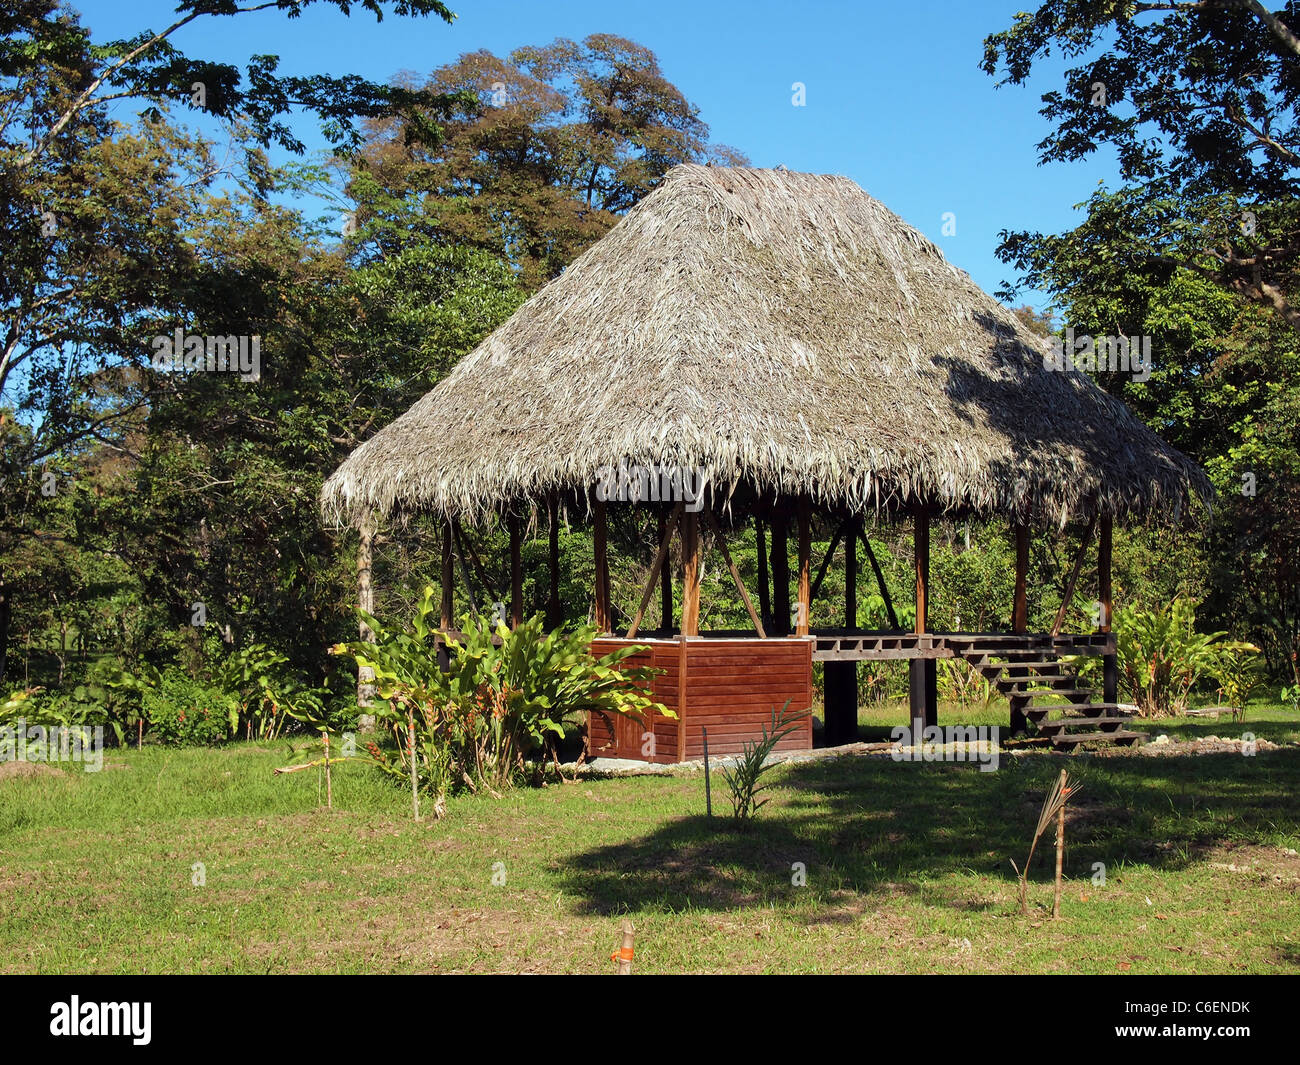 Tropical hut with thatched palm roof in Panama, Central America Stock Photo